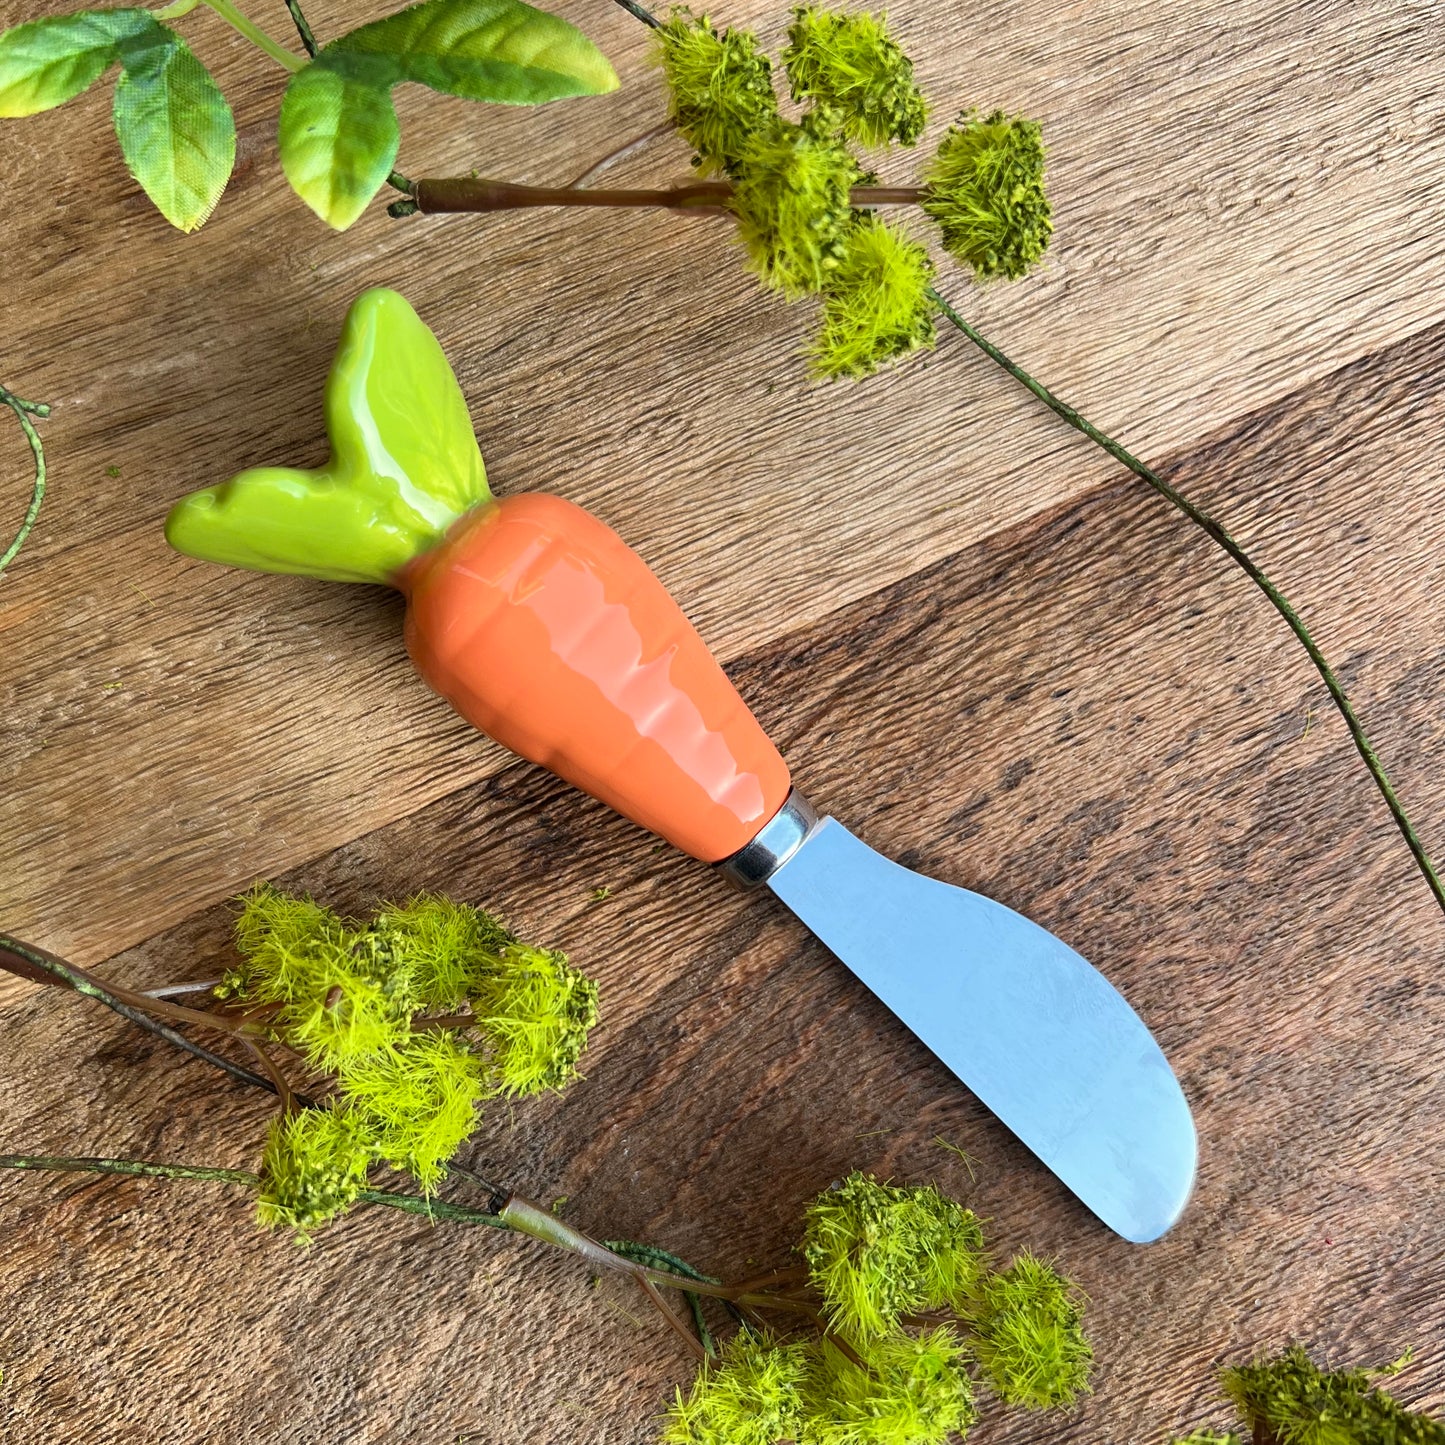 ceramic carrot handle on stainless steel spreader on wooden background with sprigs of greenery.